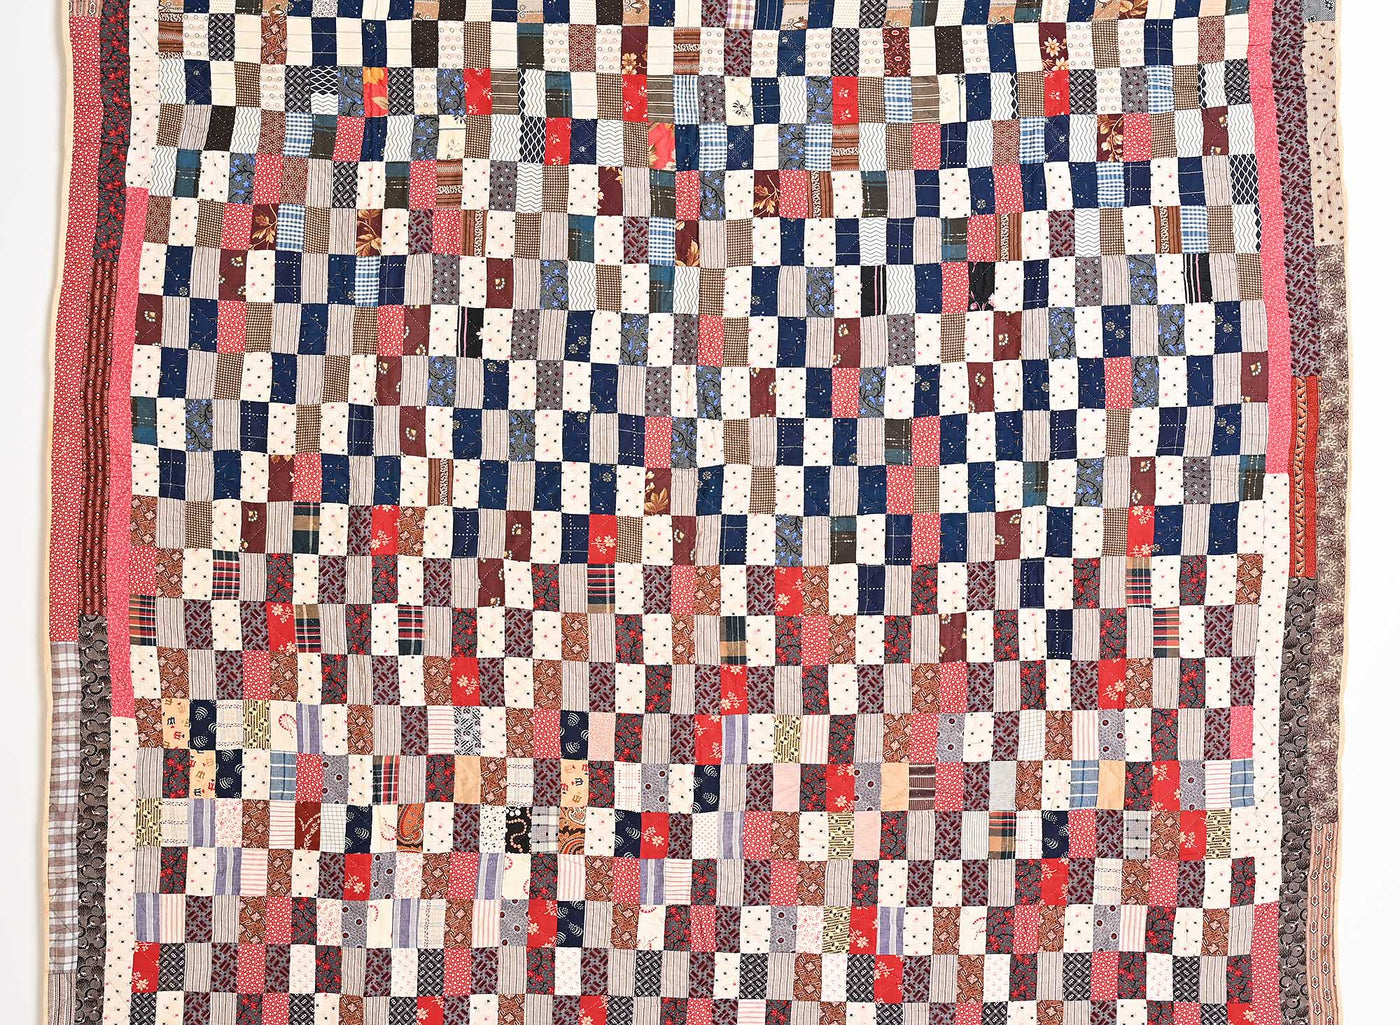 Center view of 19th Century Calico One Patch Rectangles Quilt.